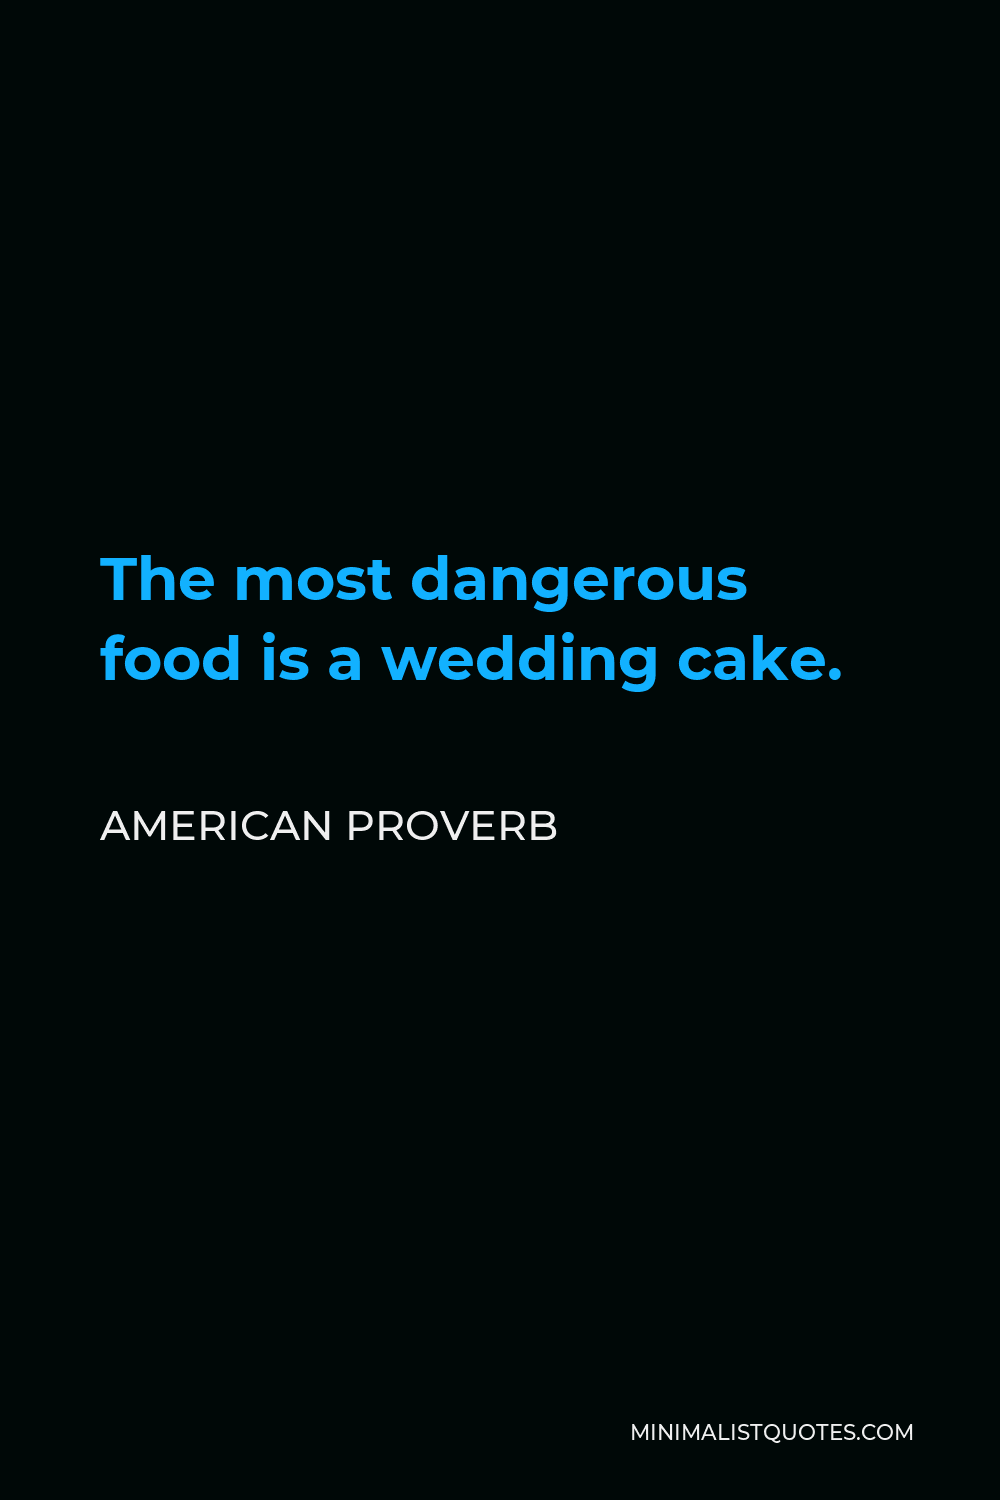 American Proverb Quote - The most dangerous food is a wedding cake.